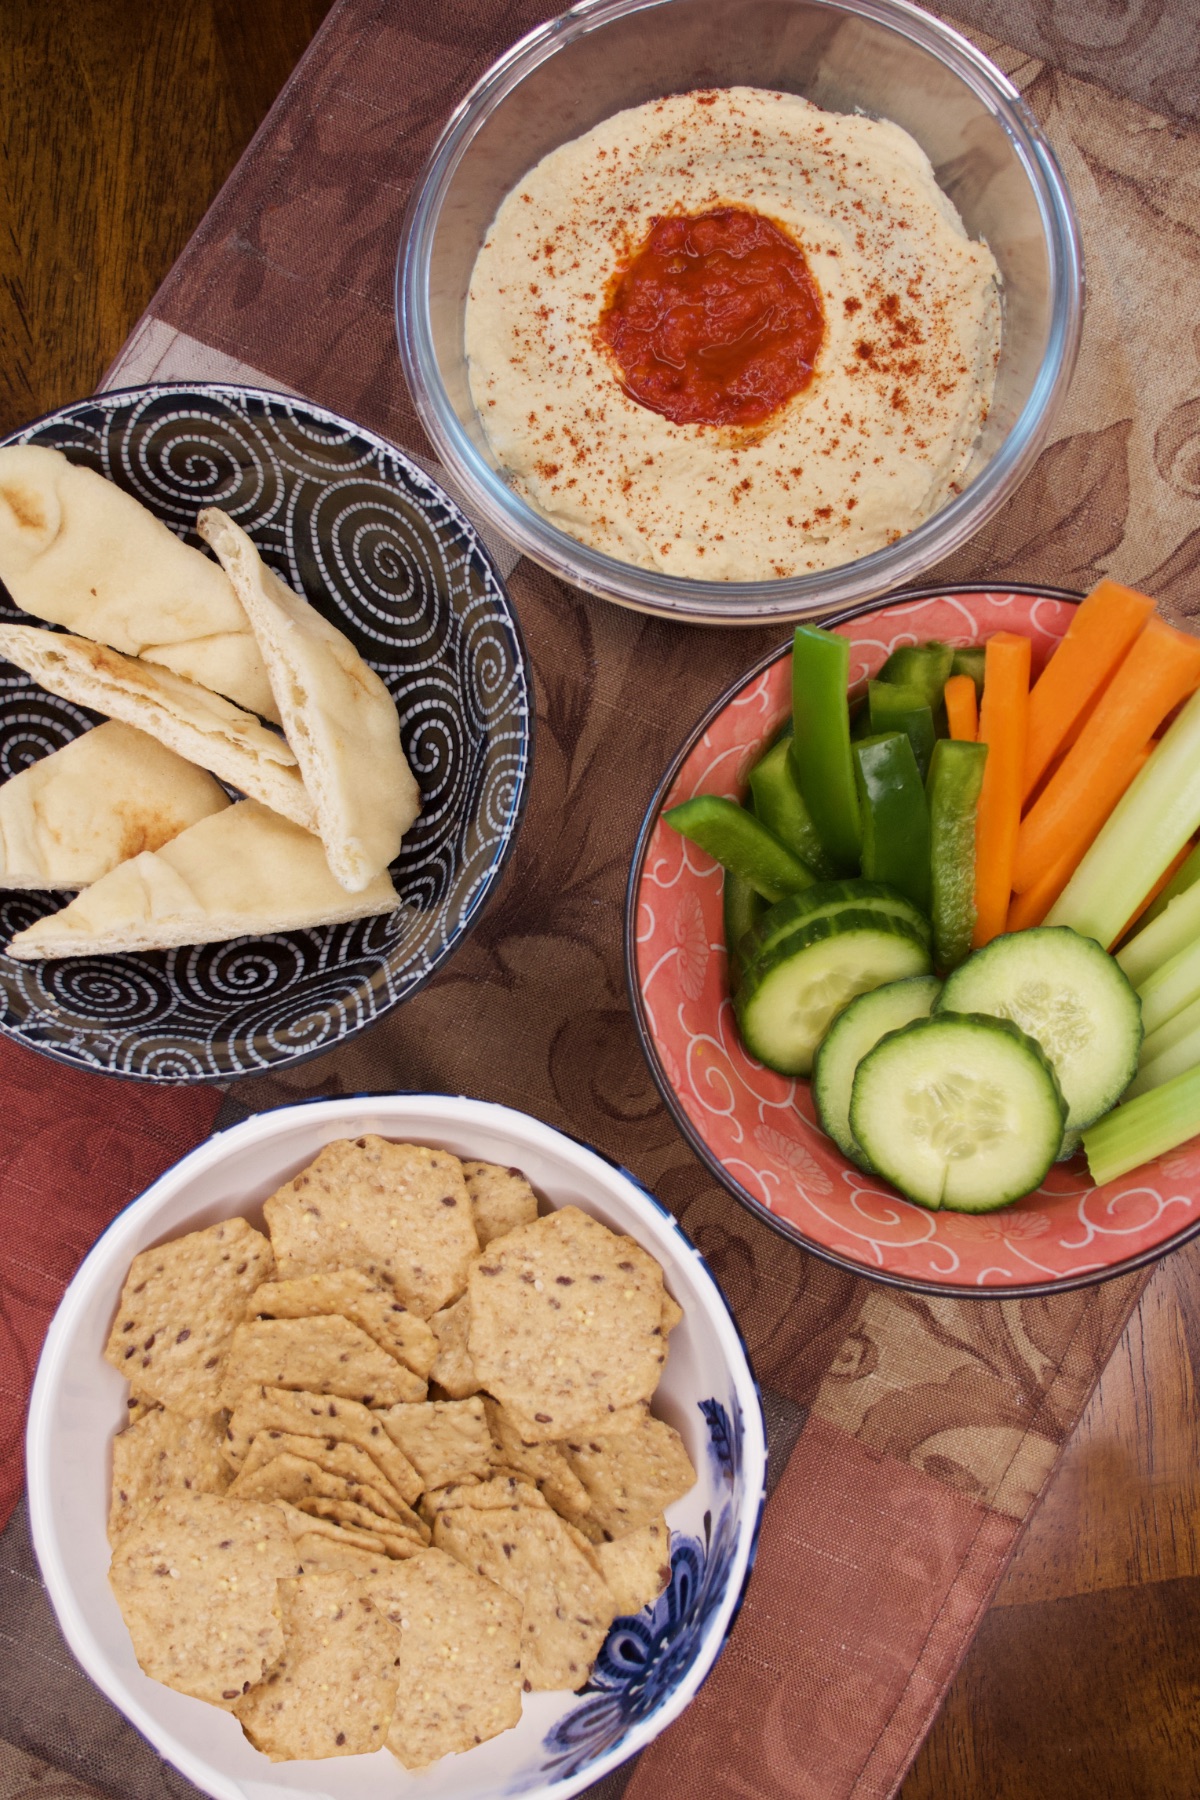 A bowl of Easy Spicy Hummus with bowls of some of our favorite snacks for dipping, including sliced vegetables (celery, carrots, cucumber, and green pepper), crackers, and pita.